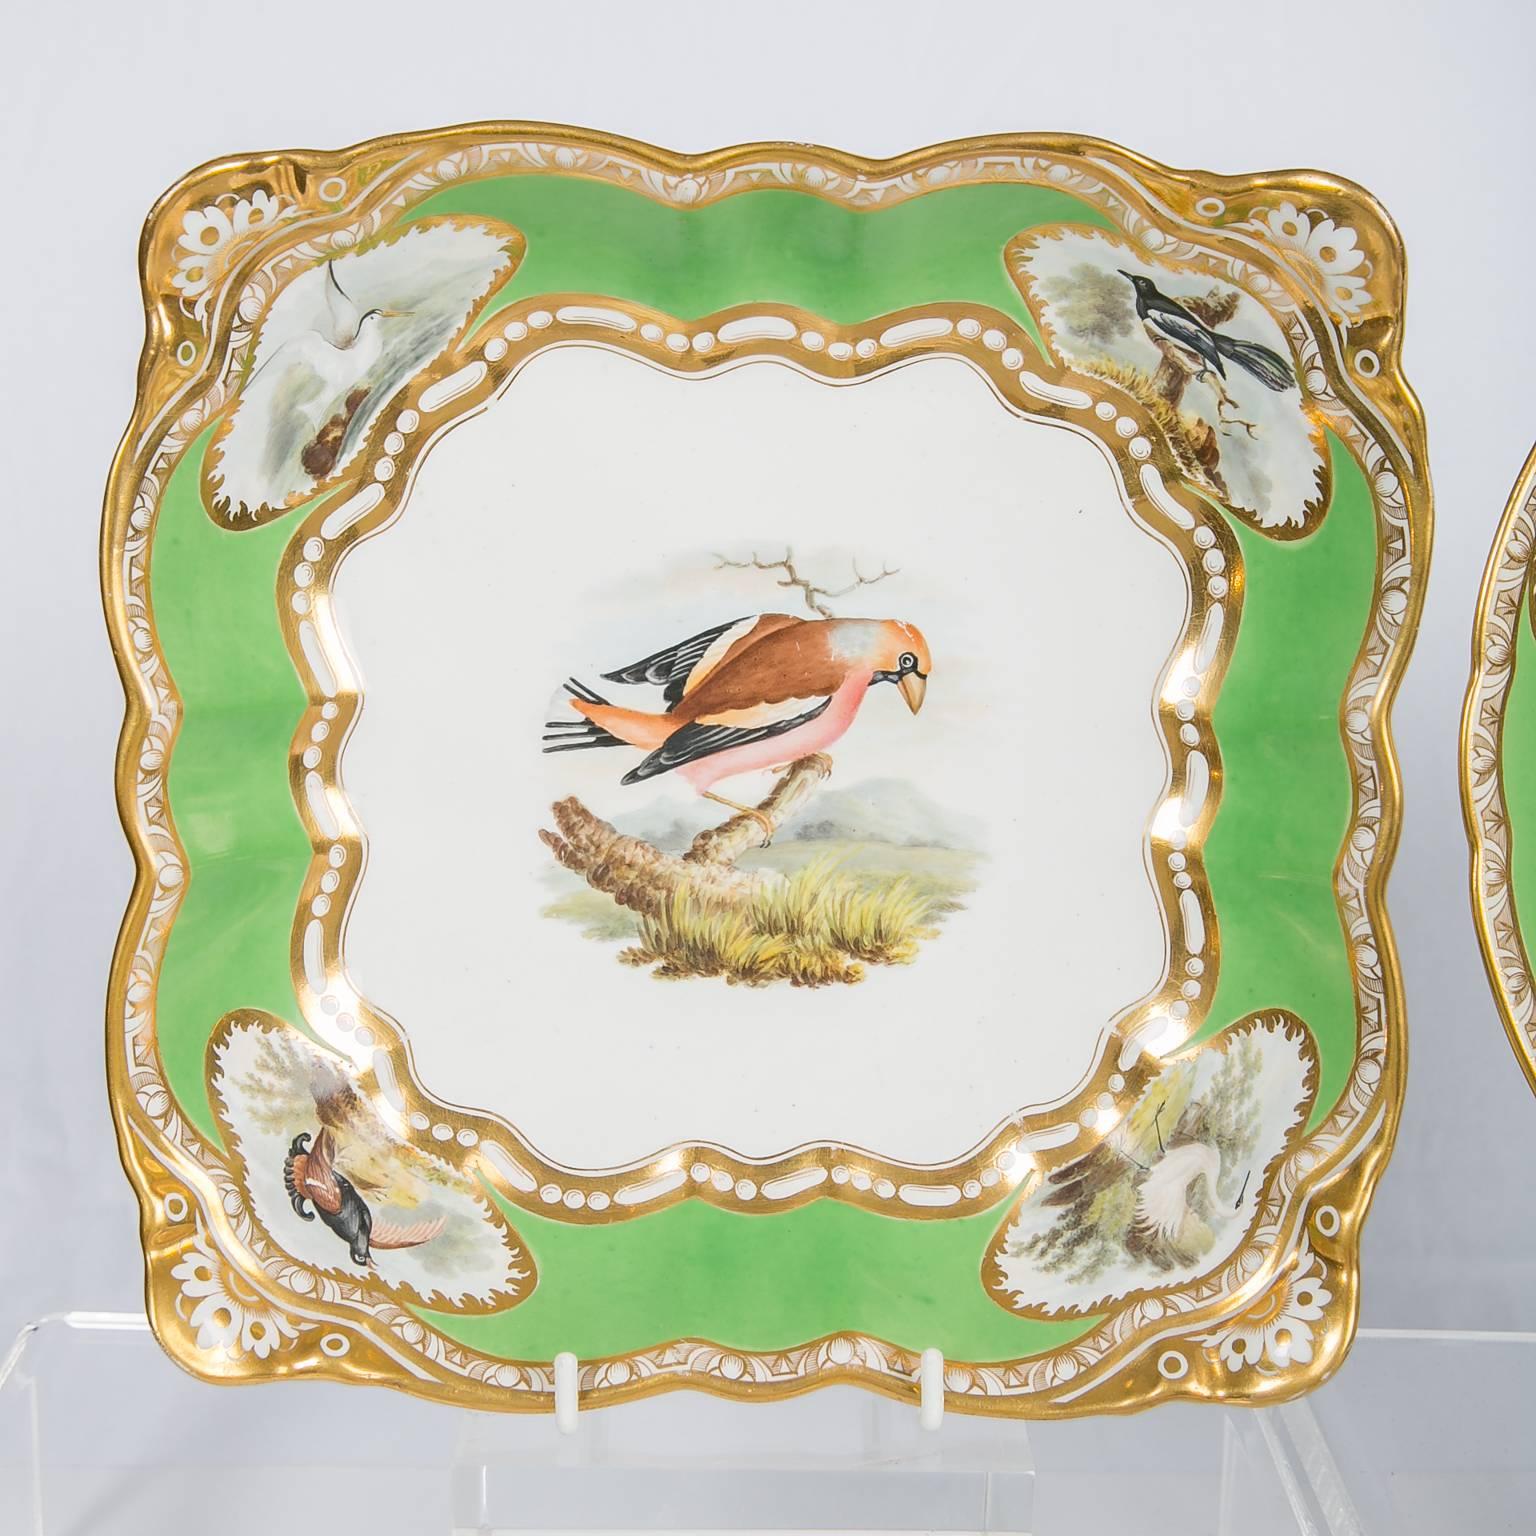 19th Century Spode Dishes with Hand-Painted Birds and Apple Green Borders